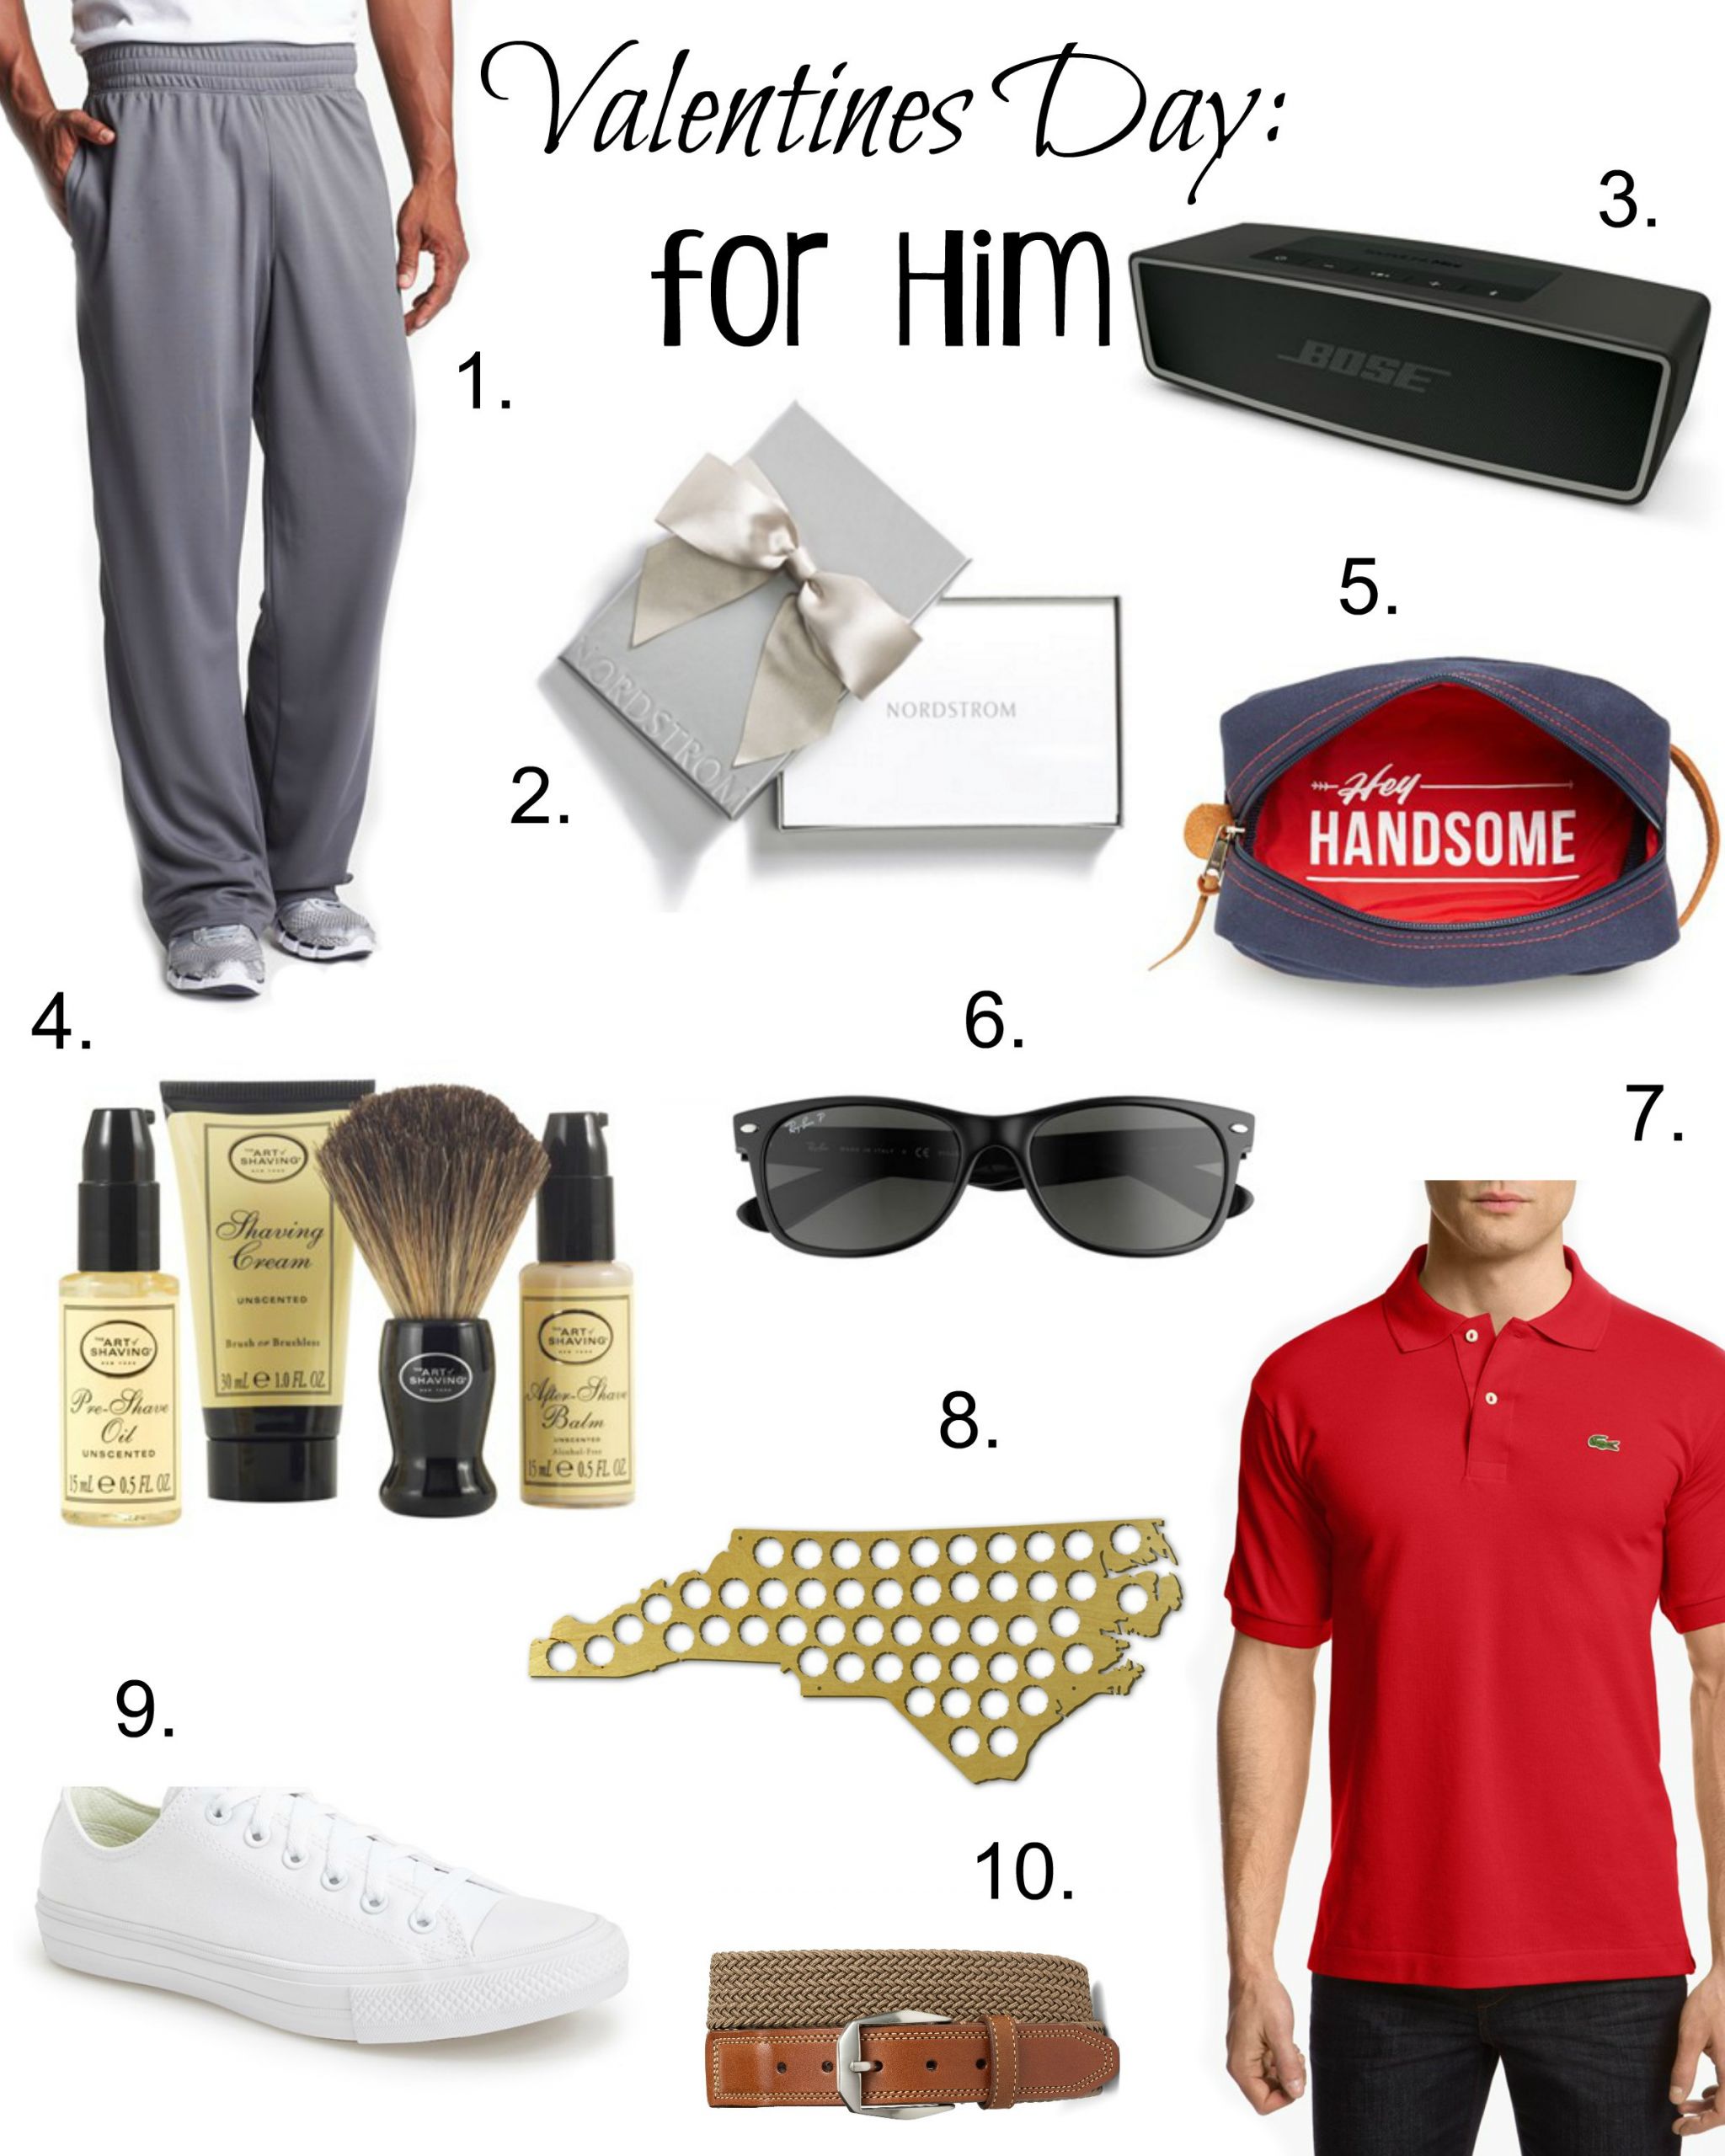 Great Valentines Day Gifts for Him Elegant top 10 Valentines Day Gifts for Him